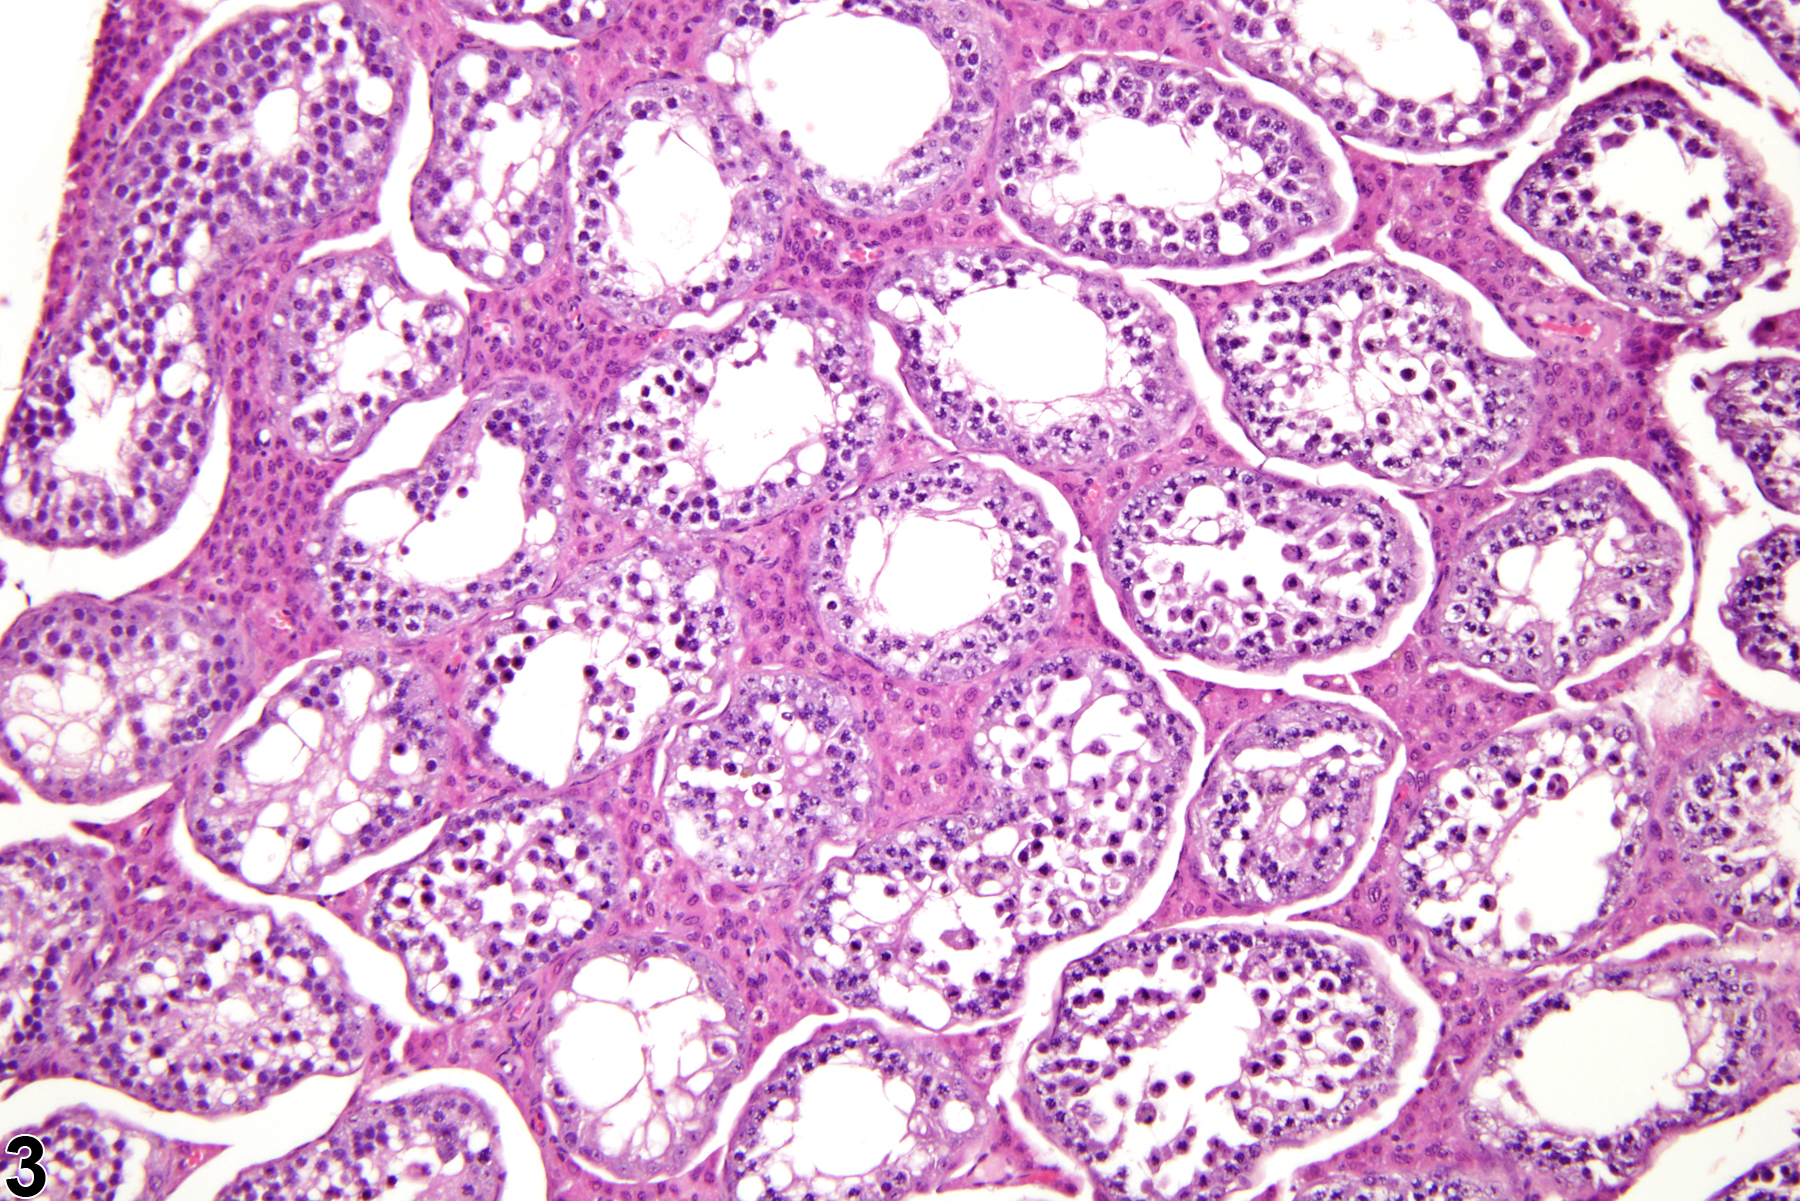 Image of interstitial cell hyperplasia in the testis from a male B6C3F1 mouse in a chronic study